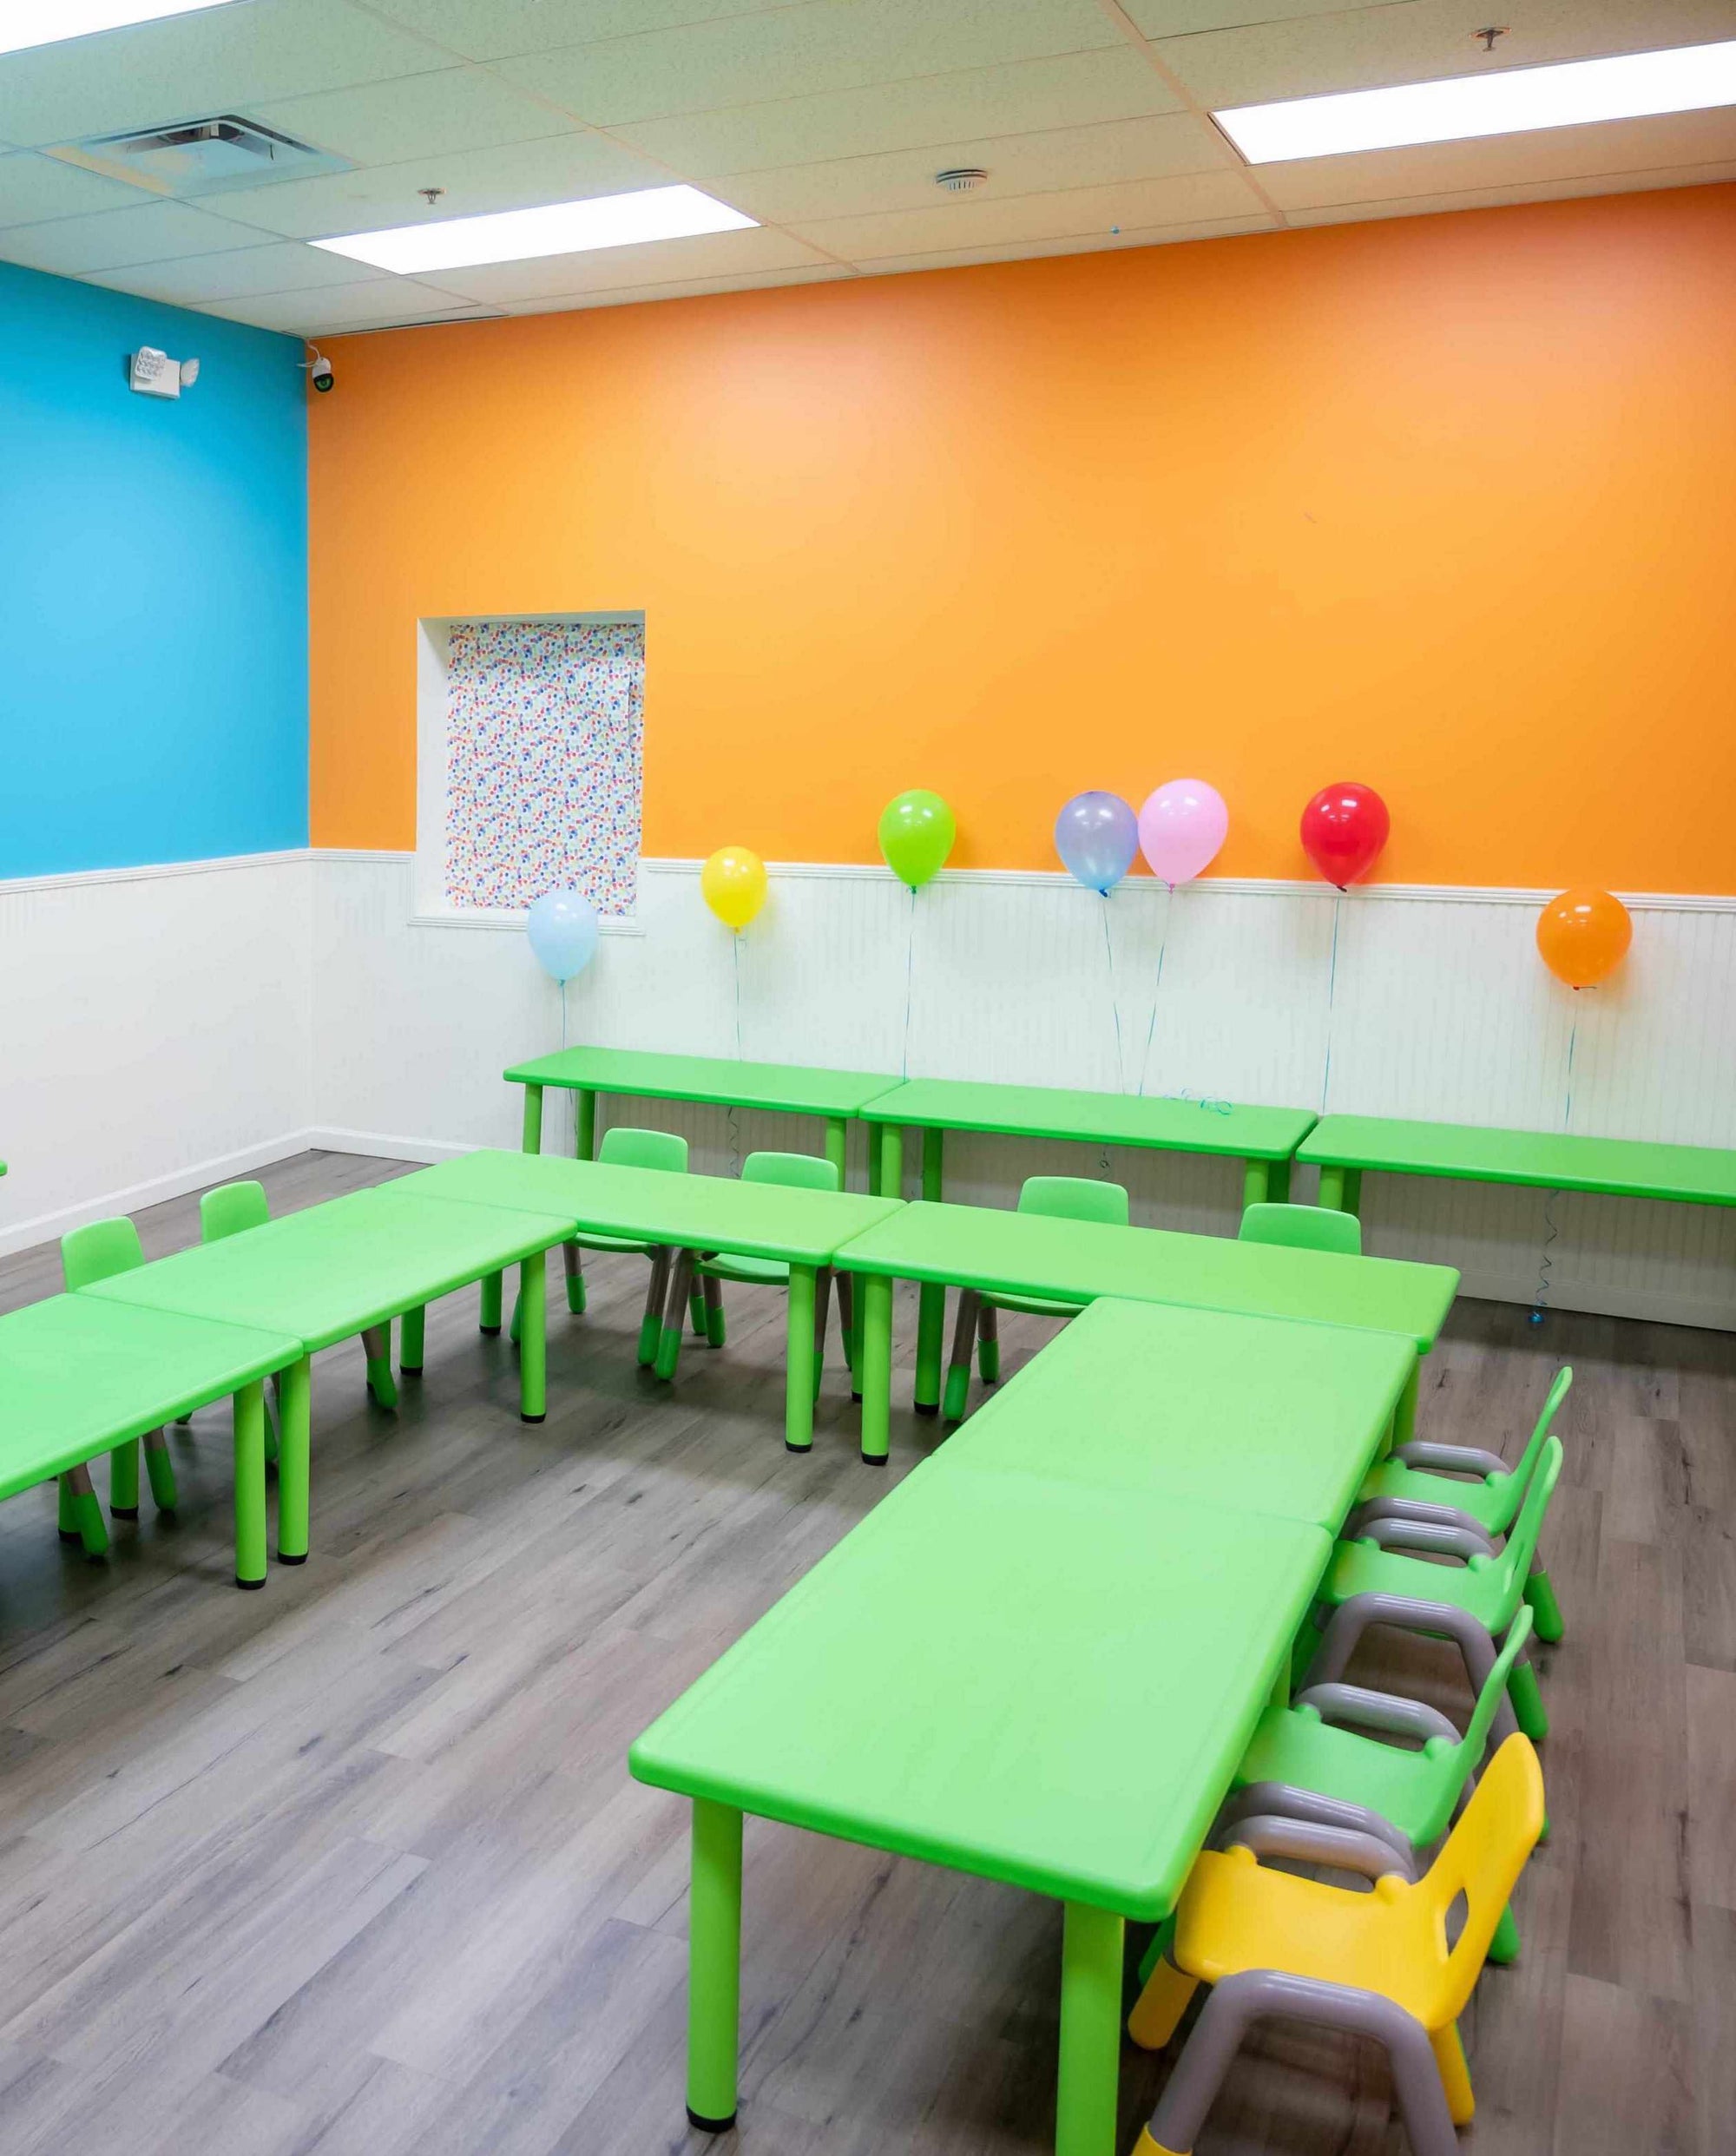 Kids birthday party place Atlanta with private party room - Confetti Jar